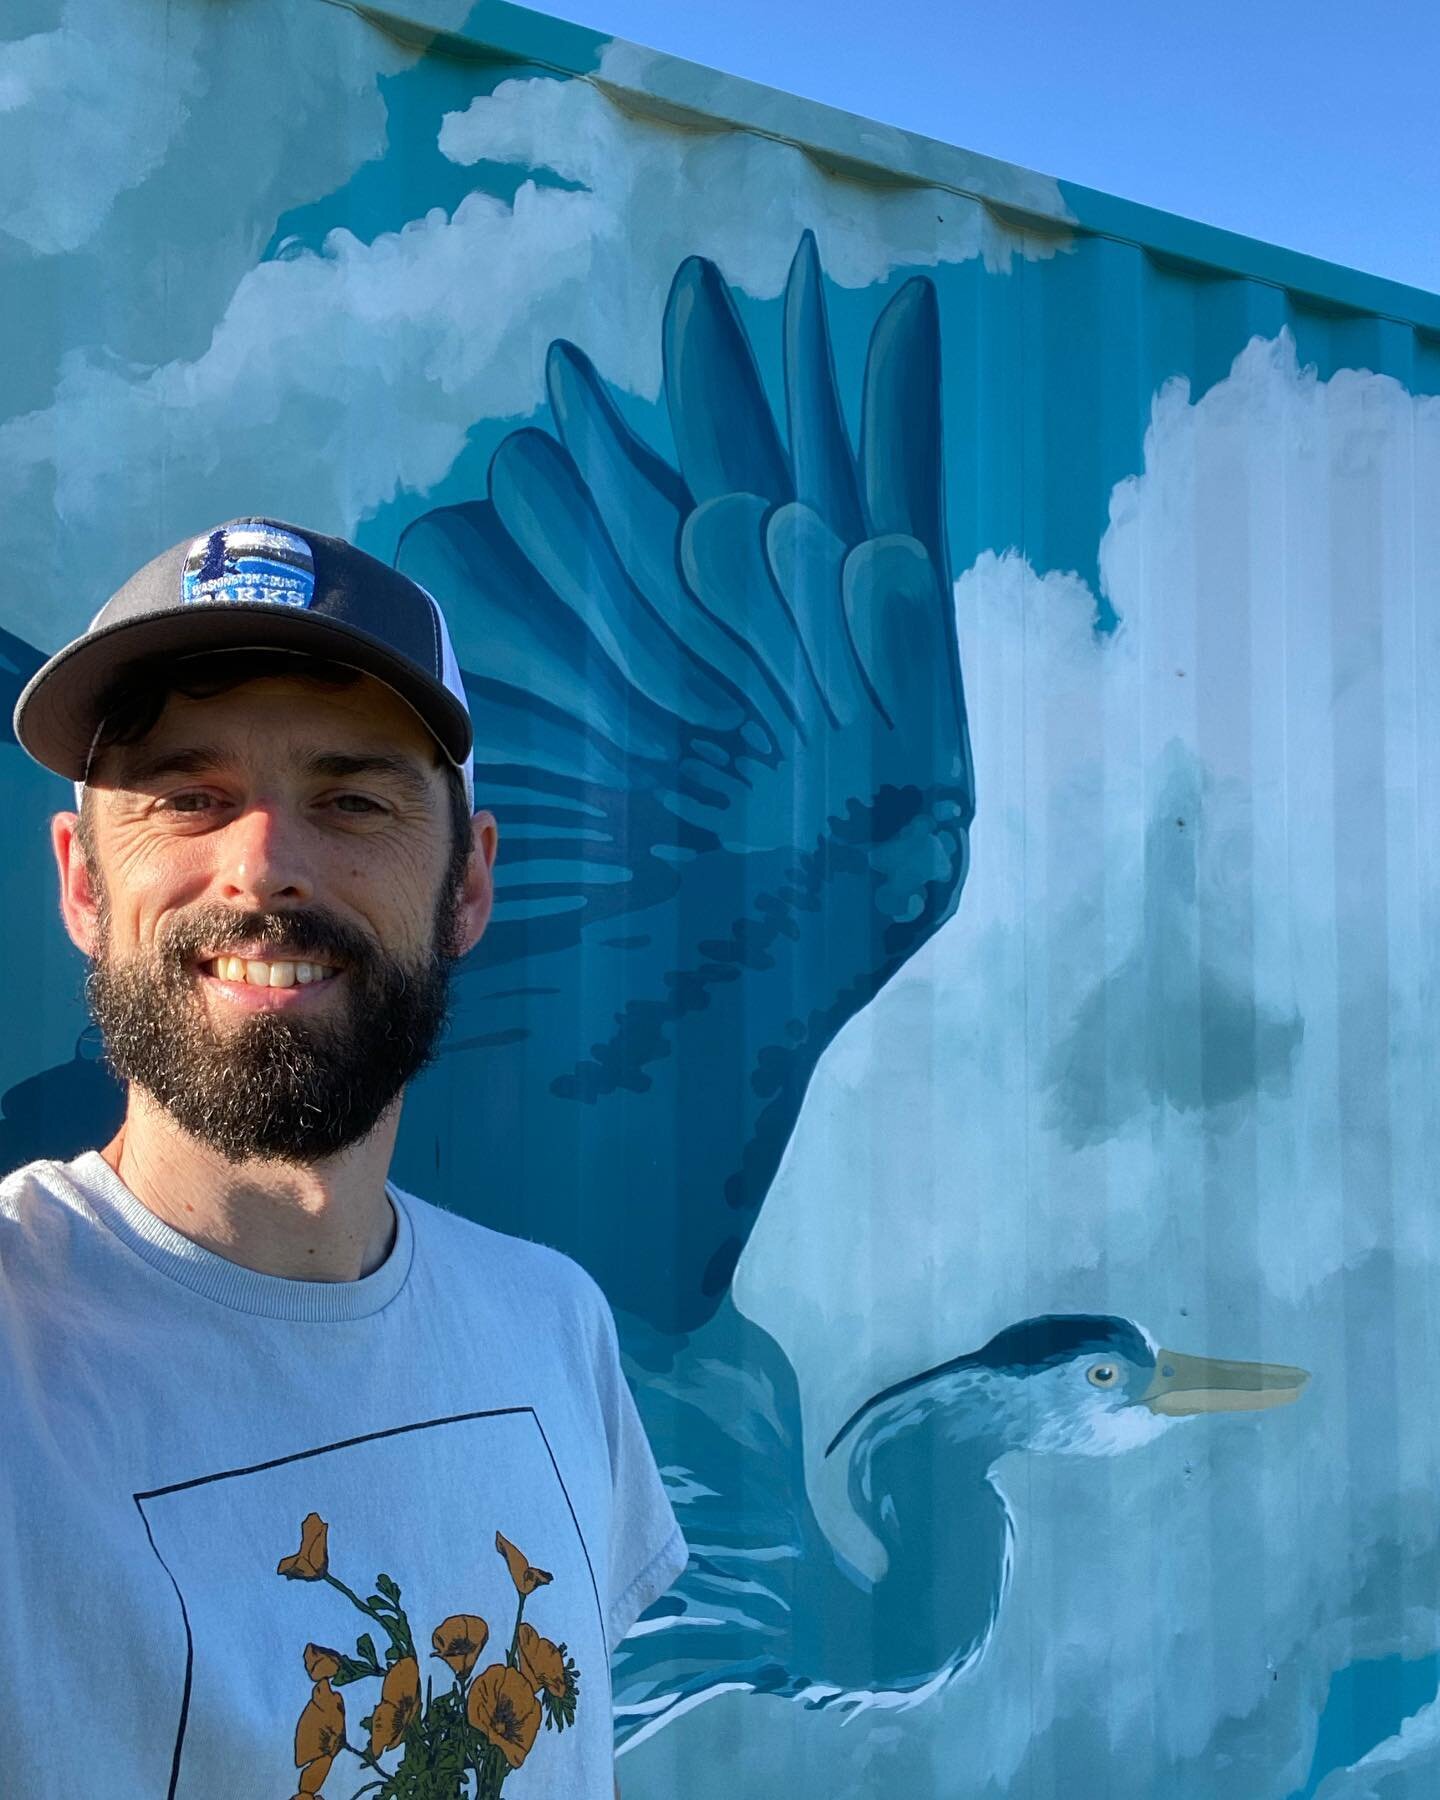 First big event for the heron mural! It was good to see some live music and run into some old friends @ridgewalkerbrewing thanks again @washcoparks and for the new hat. Great occasion for my shirt @therareoccasions #hagglakeheron ✌️